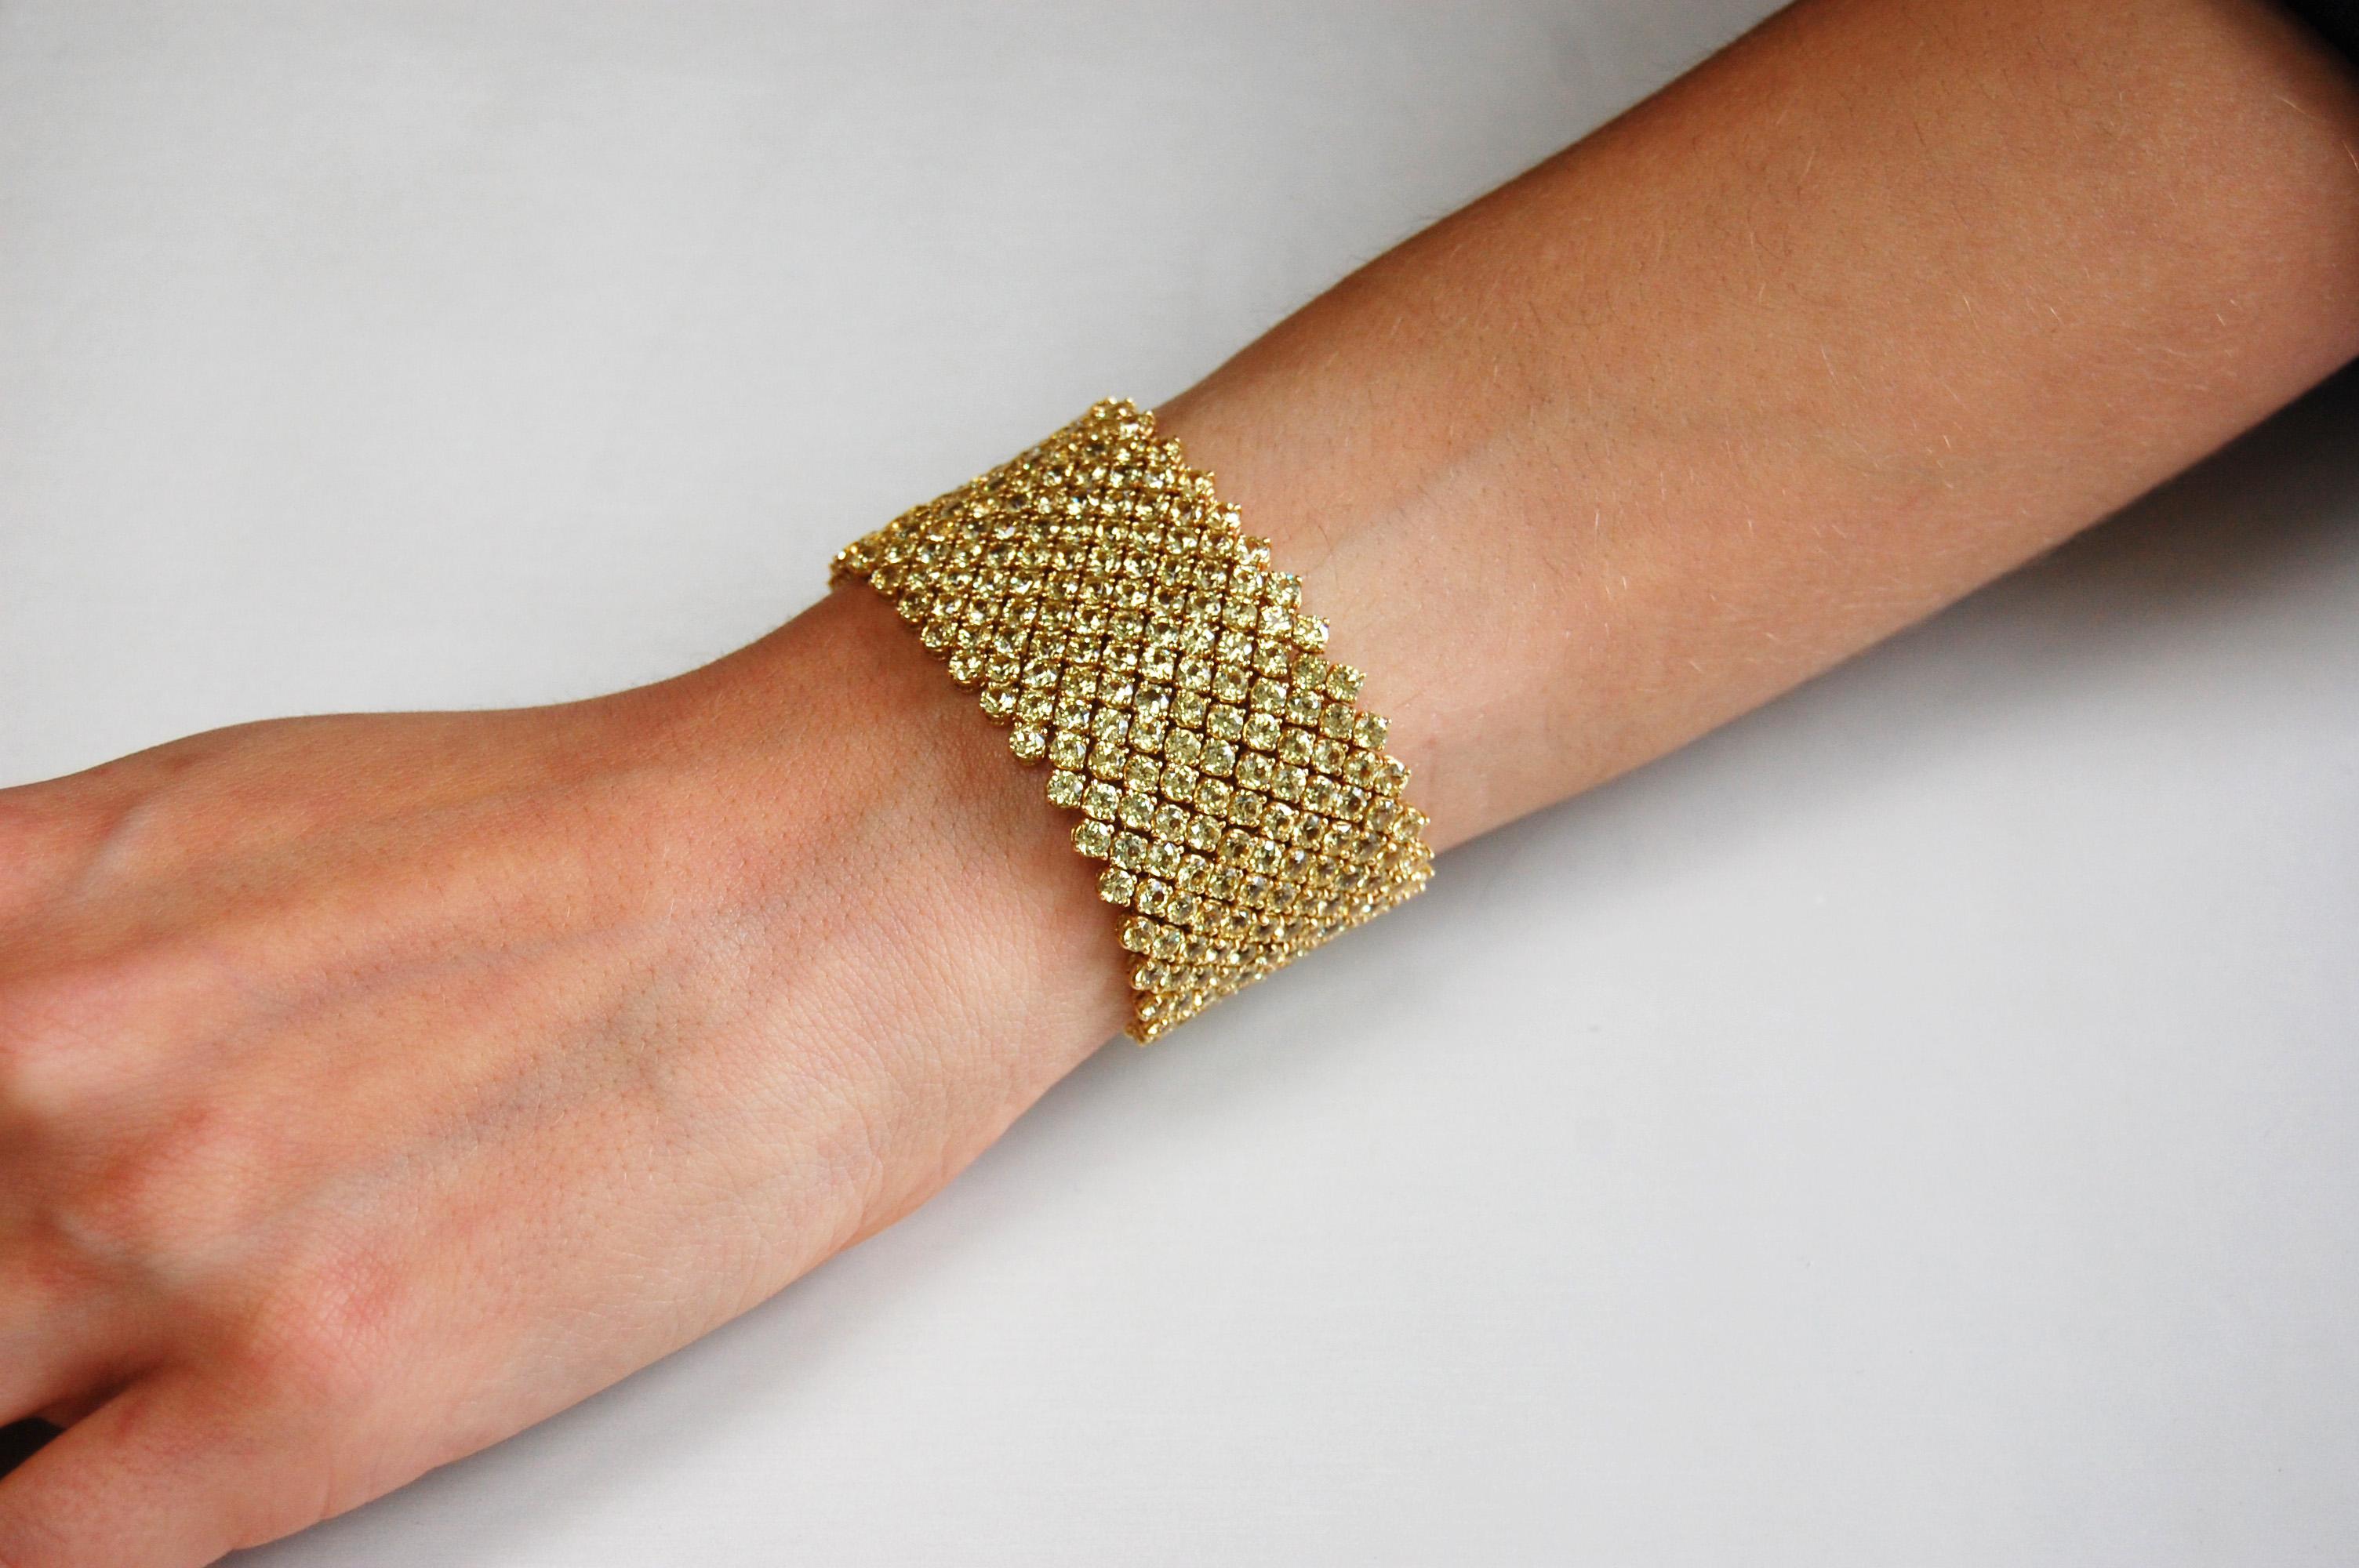 A spectacular bracelet comprised of 494 perfectly matched round brilliant-cut natural unheated yellow sapphires weighing 68.61 carats total, certified by C.Dunaigre, set in a very flexible 18kt yellow gold mesh design.

The Monochrome Collection by